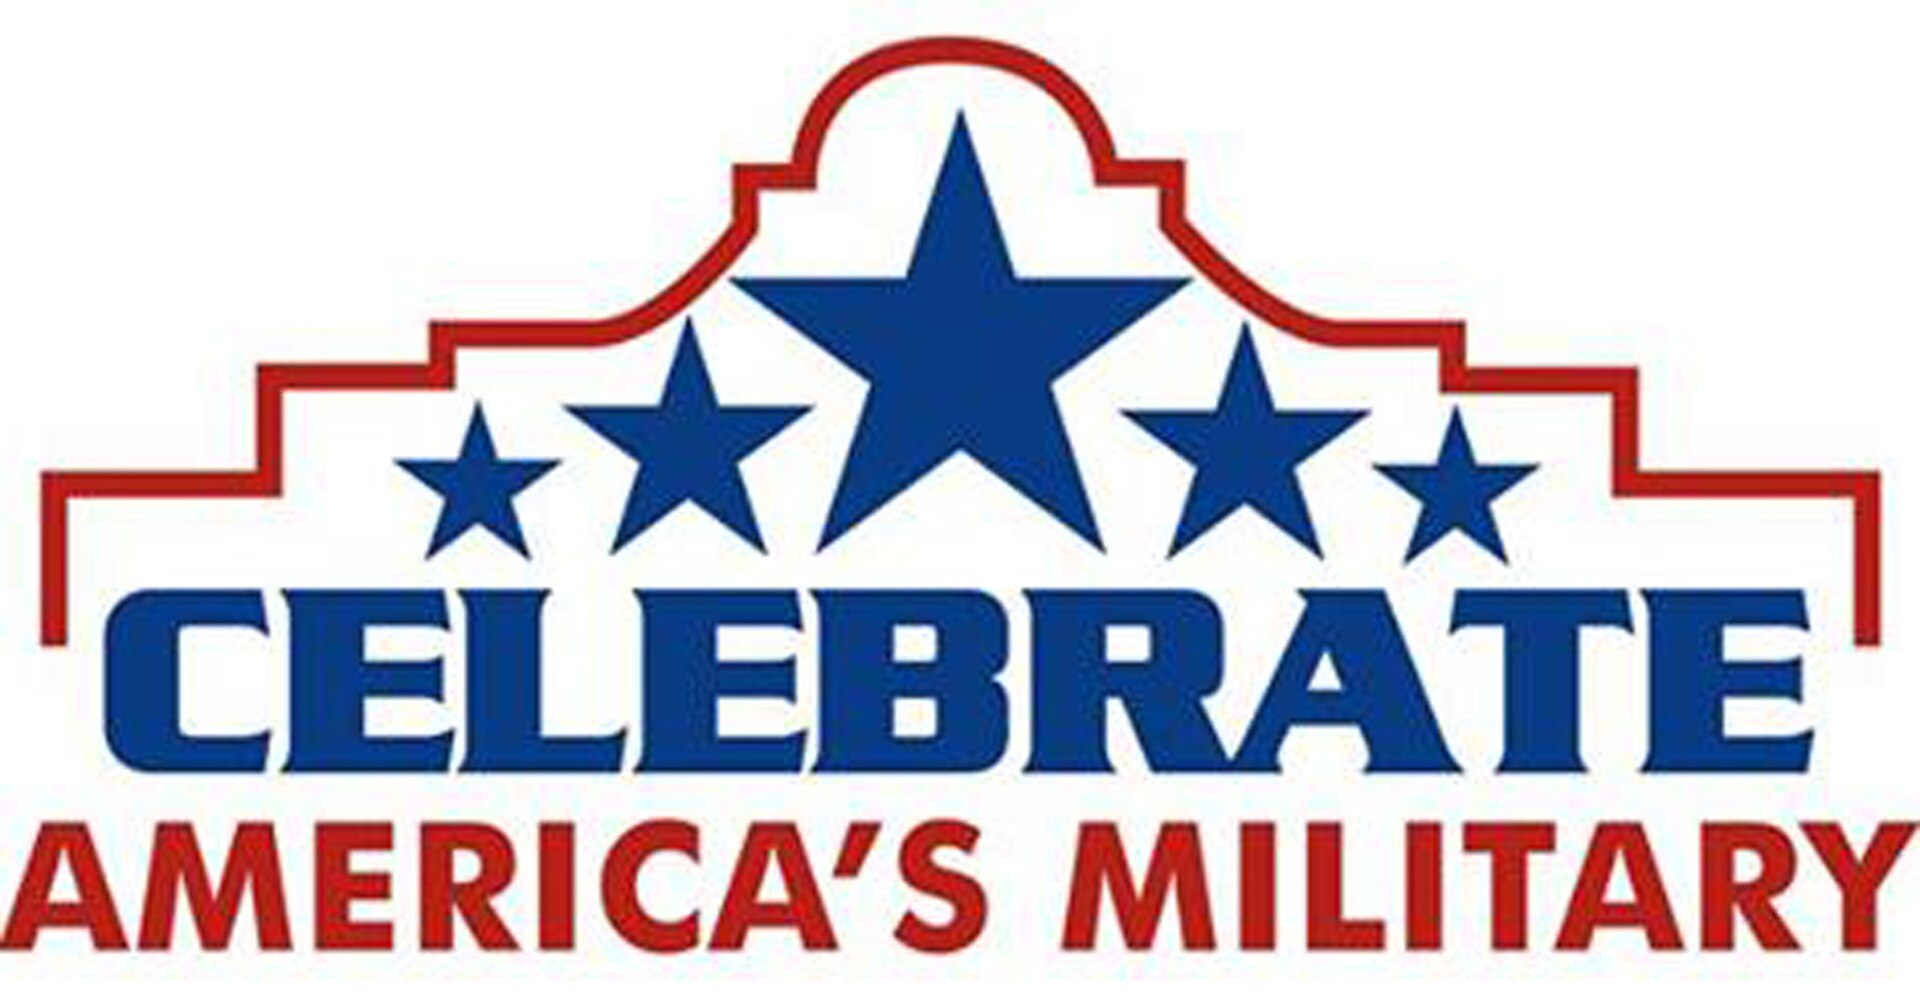 Since 1970, the San Antonio Chamber of Commerce has organized Celebrate America’s Military, or CAM, an annual tribute to the military. The two-week celebration during the month of November features events presented with community partners, making it the largest event of its kind nationwide.